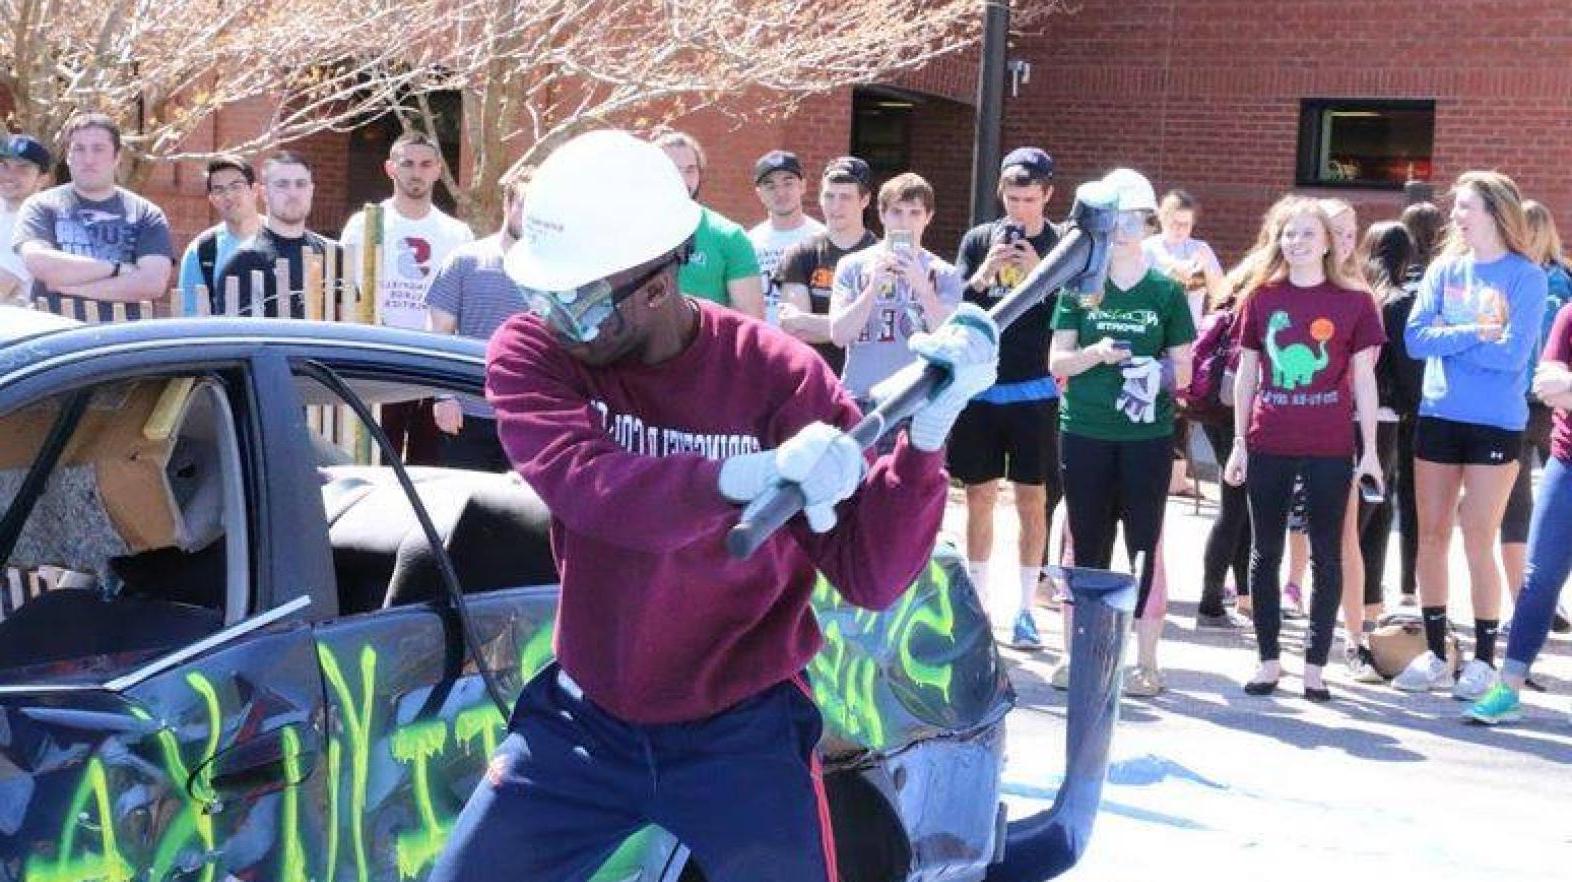 A student swings a hammer at a car as part of the whack-a-car event at Sti-Yu-Ka